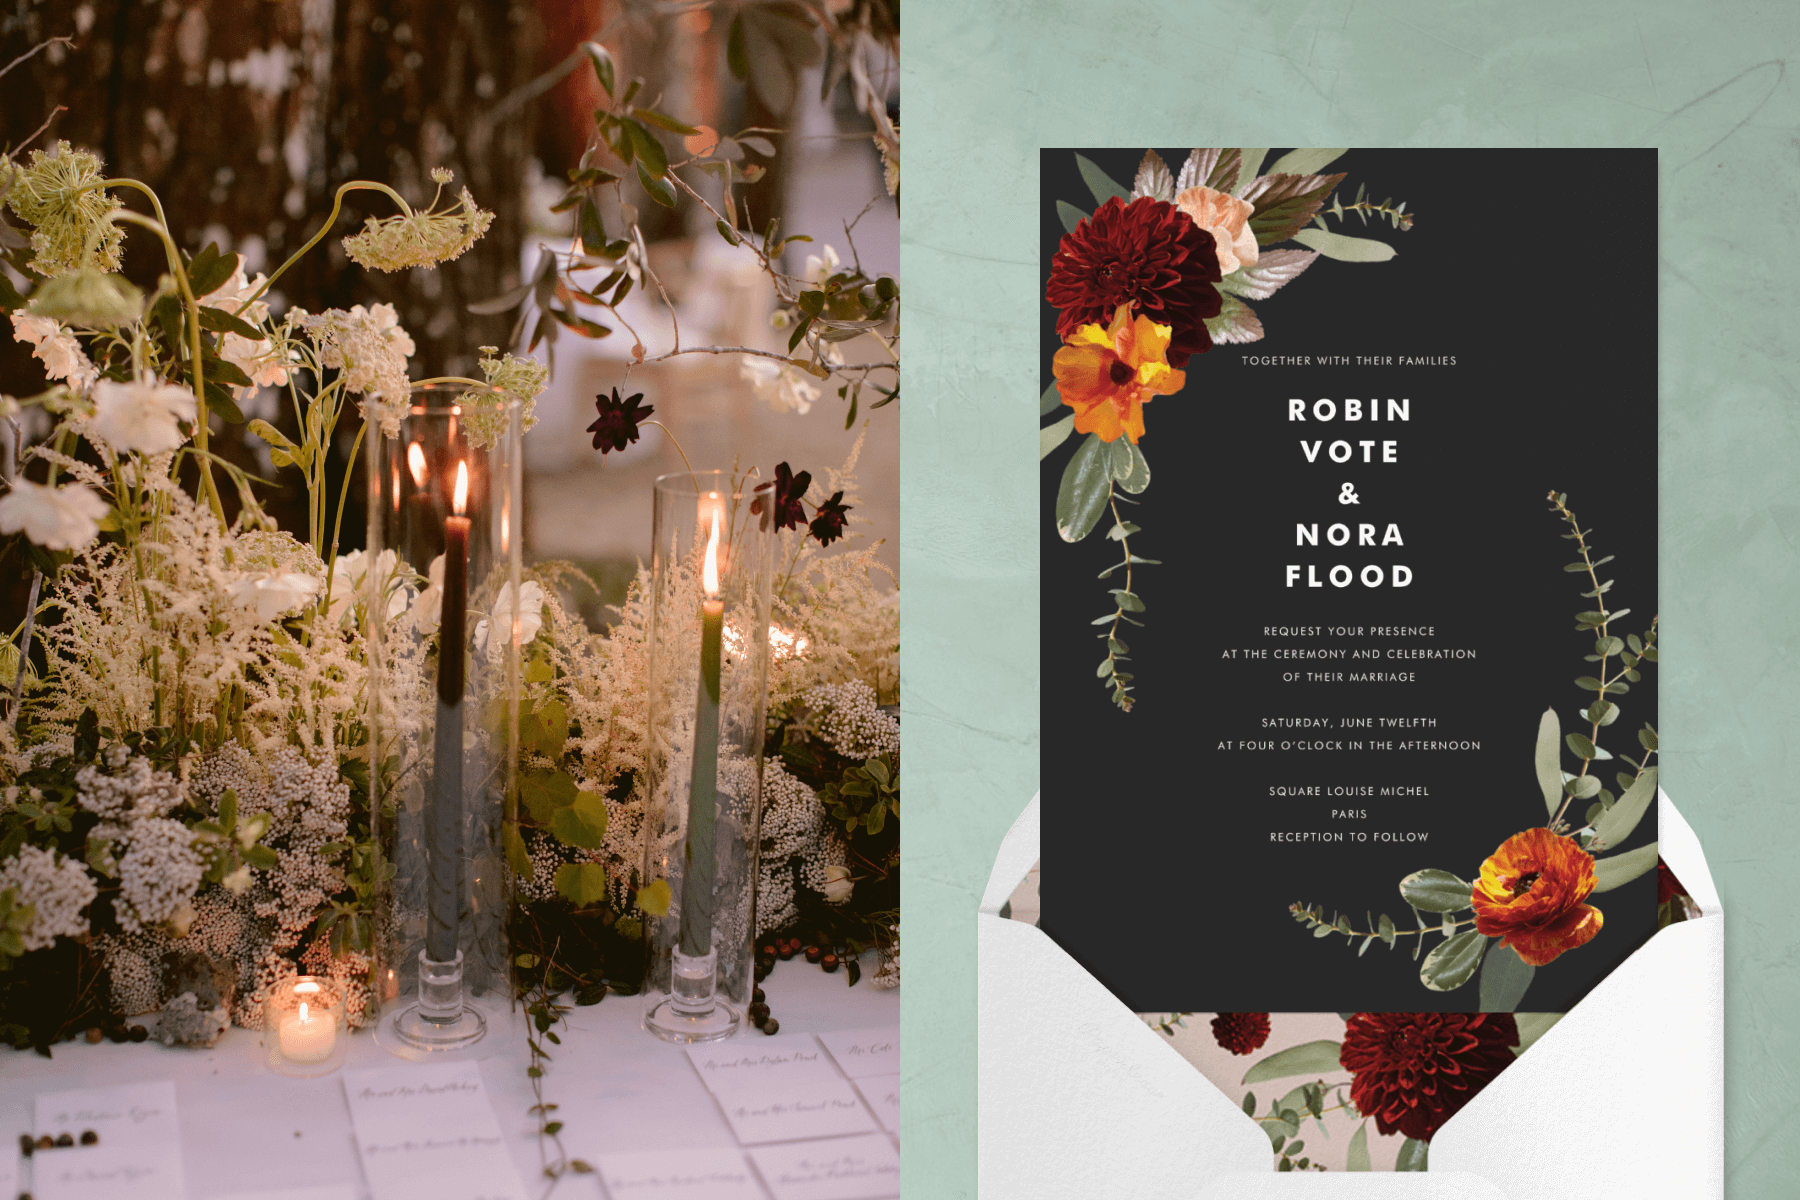 Left: Table full of wedding place cards, with white and green flowers and light green tall candles in hurricane vases. Right: Wedding invitation with dark grey background and orange and dark red florals lining opposite corners, with a white envelope. 